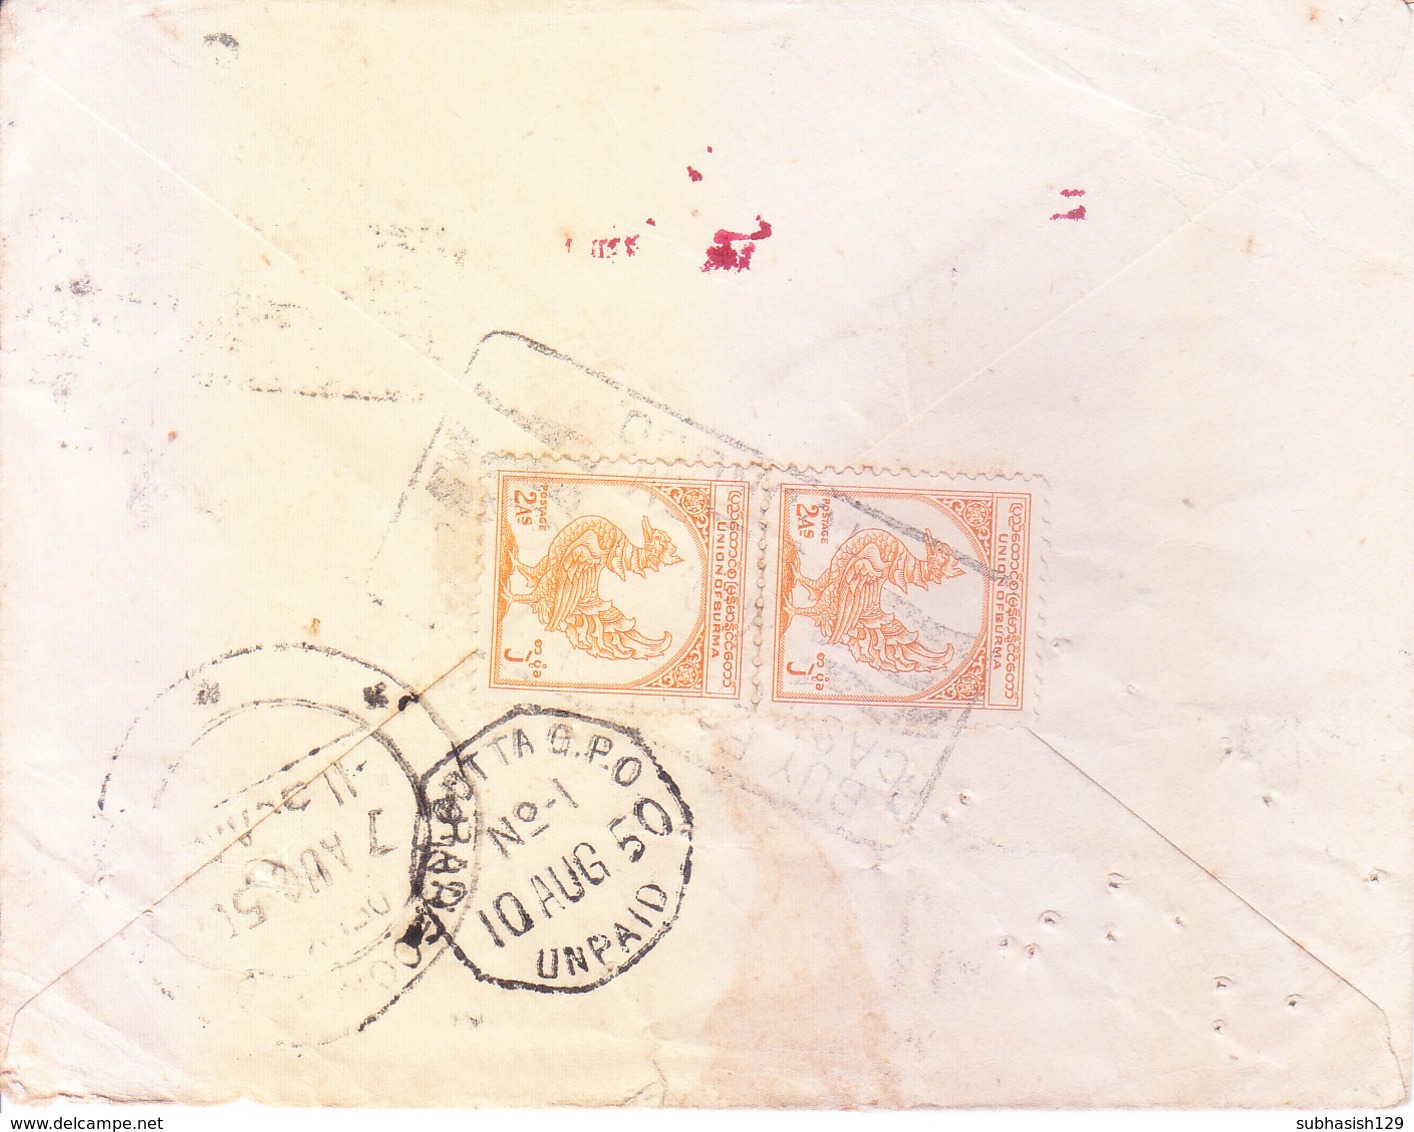 BURMA 1950 COMMERCIAL COVER - FOREIGN POSTAGE DUE MARKING AT TOUNGOO AND UNPAID MARKING AT CALCUTTA GPO - RARE & SCARCE - Myanmar (Birma 1948-...)